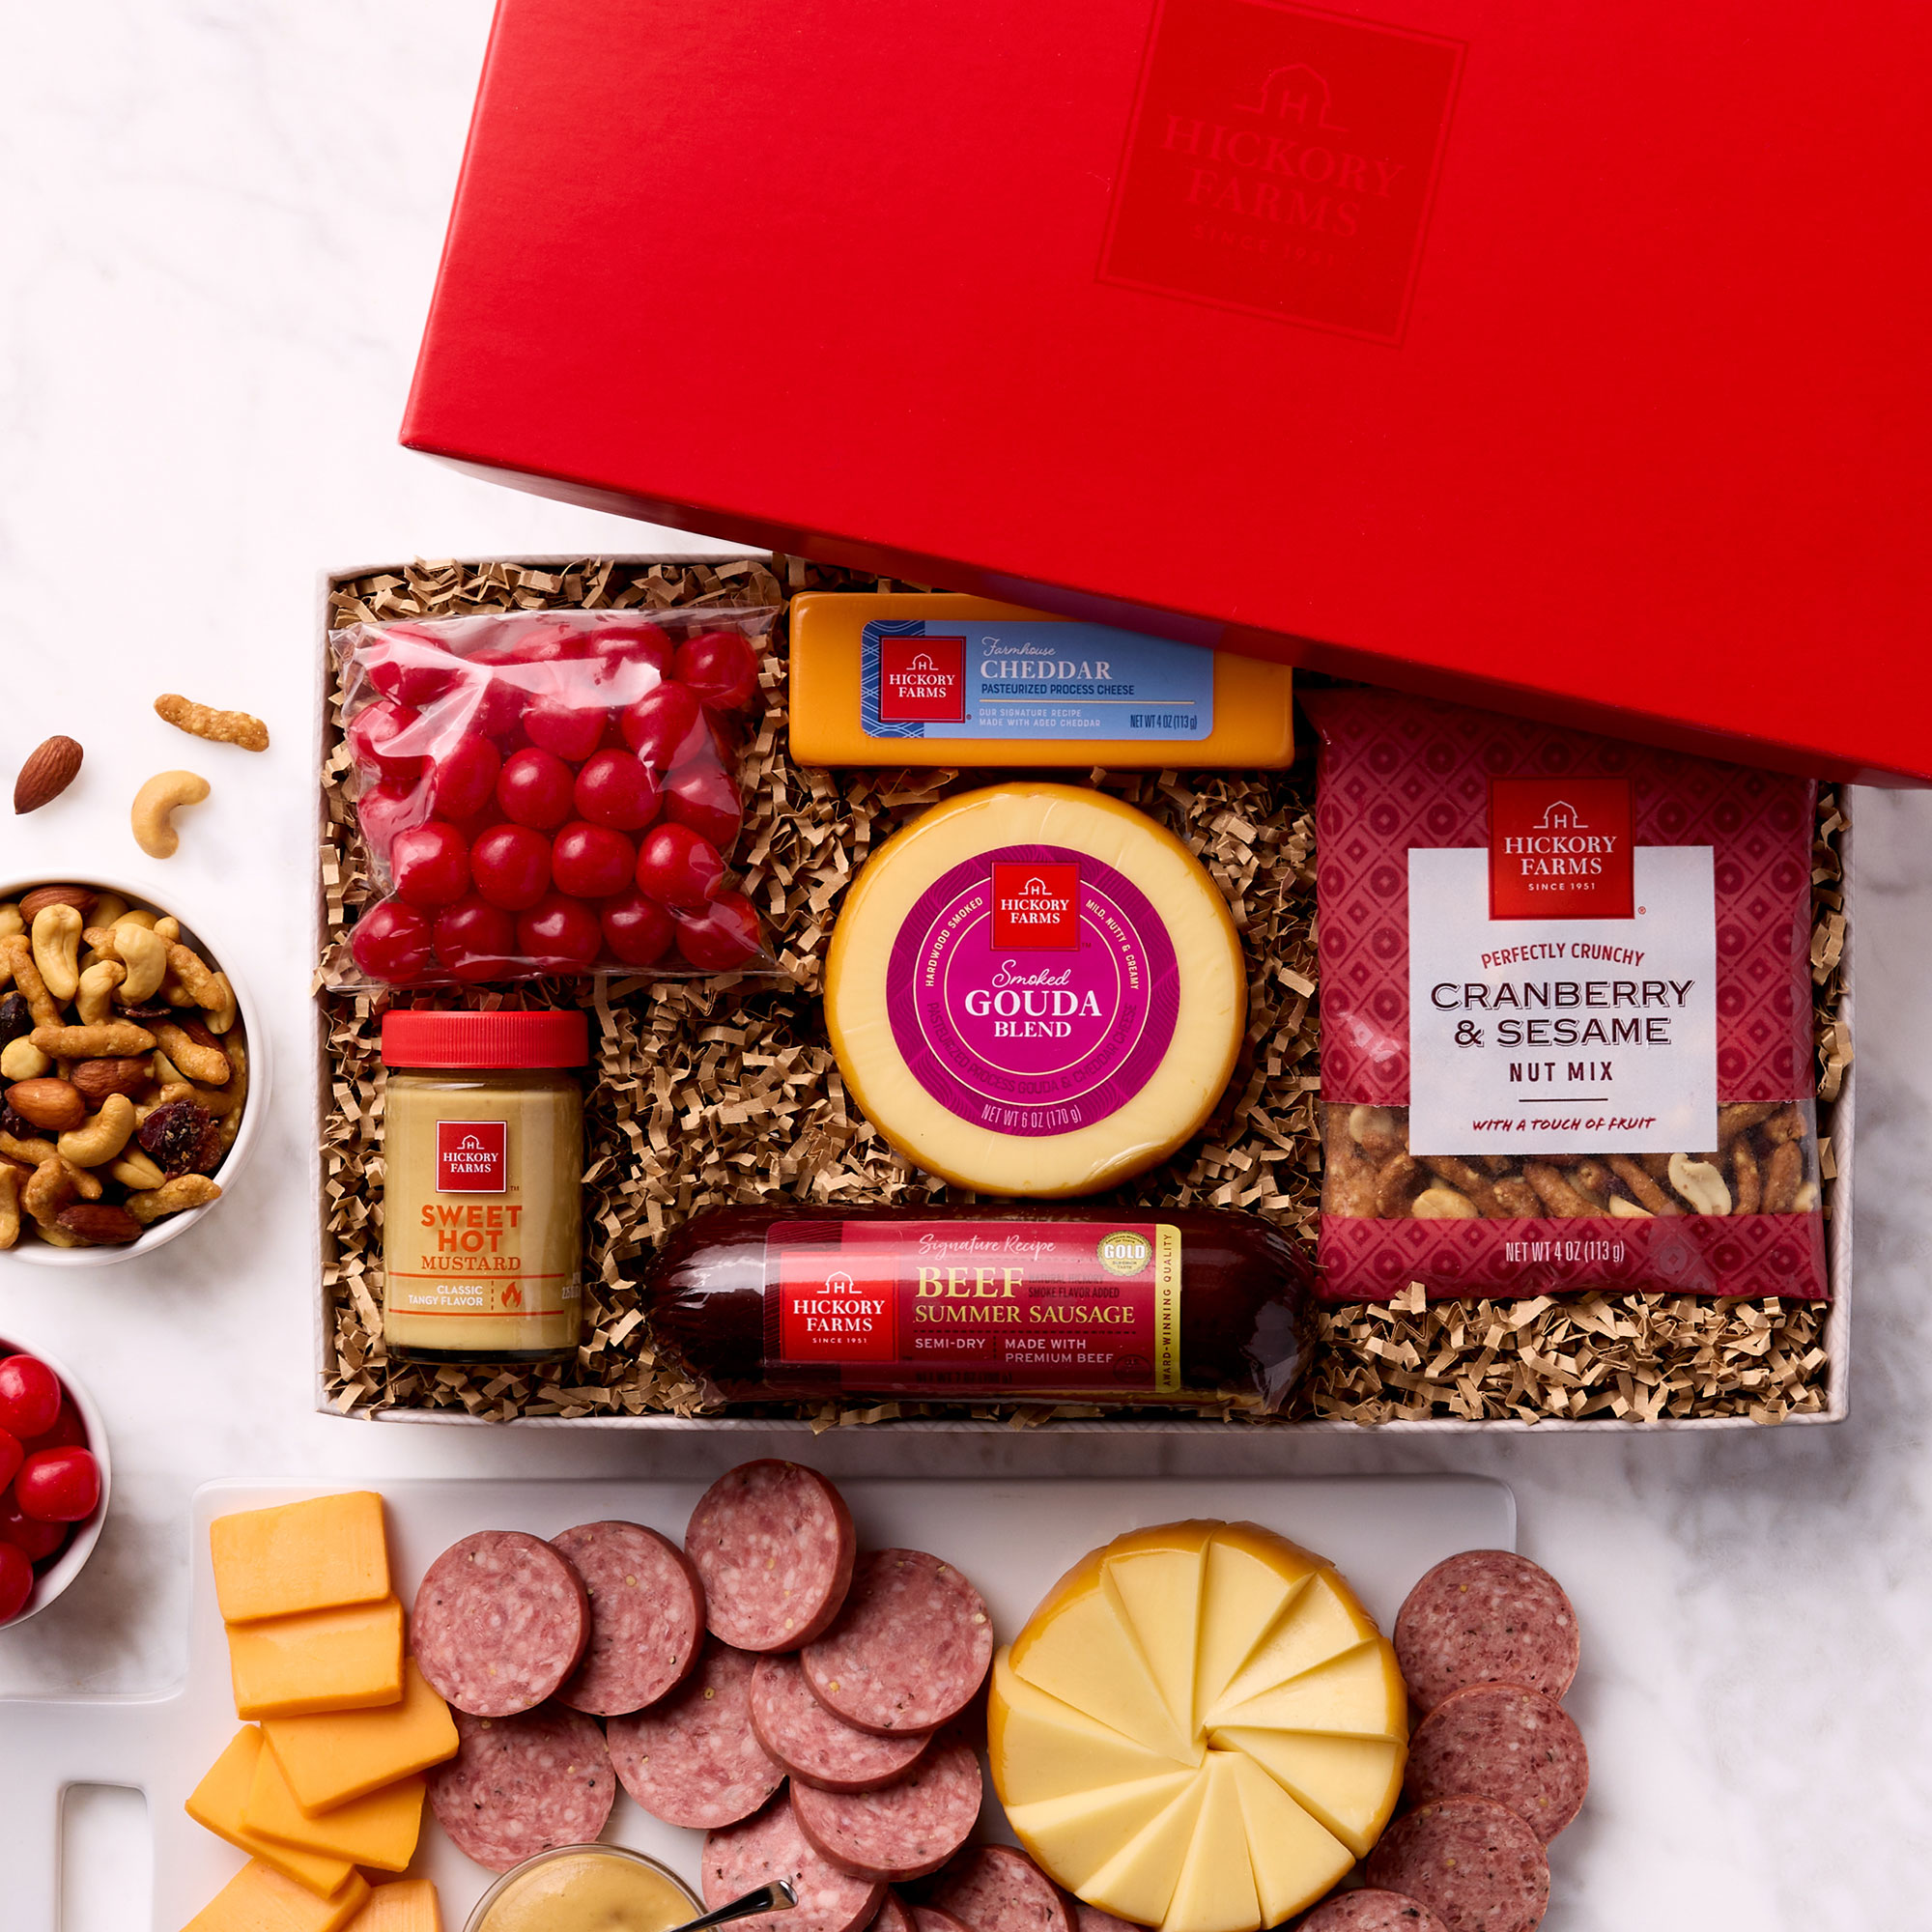 Meat & Cheese Gift Box with Sausage | Cheese & Sausage Gift | Hickory Farms